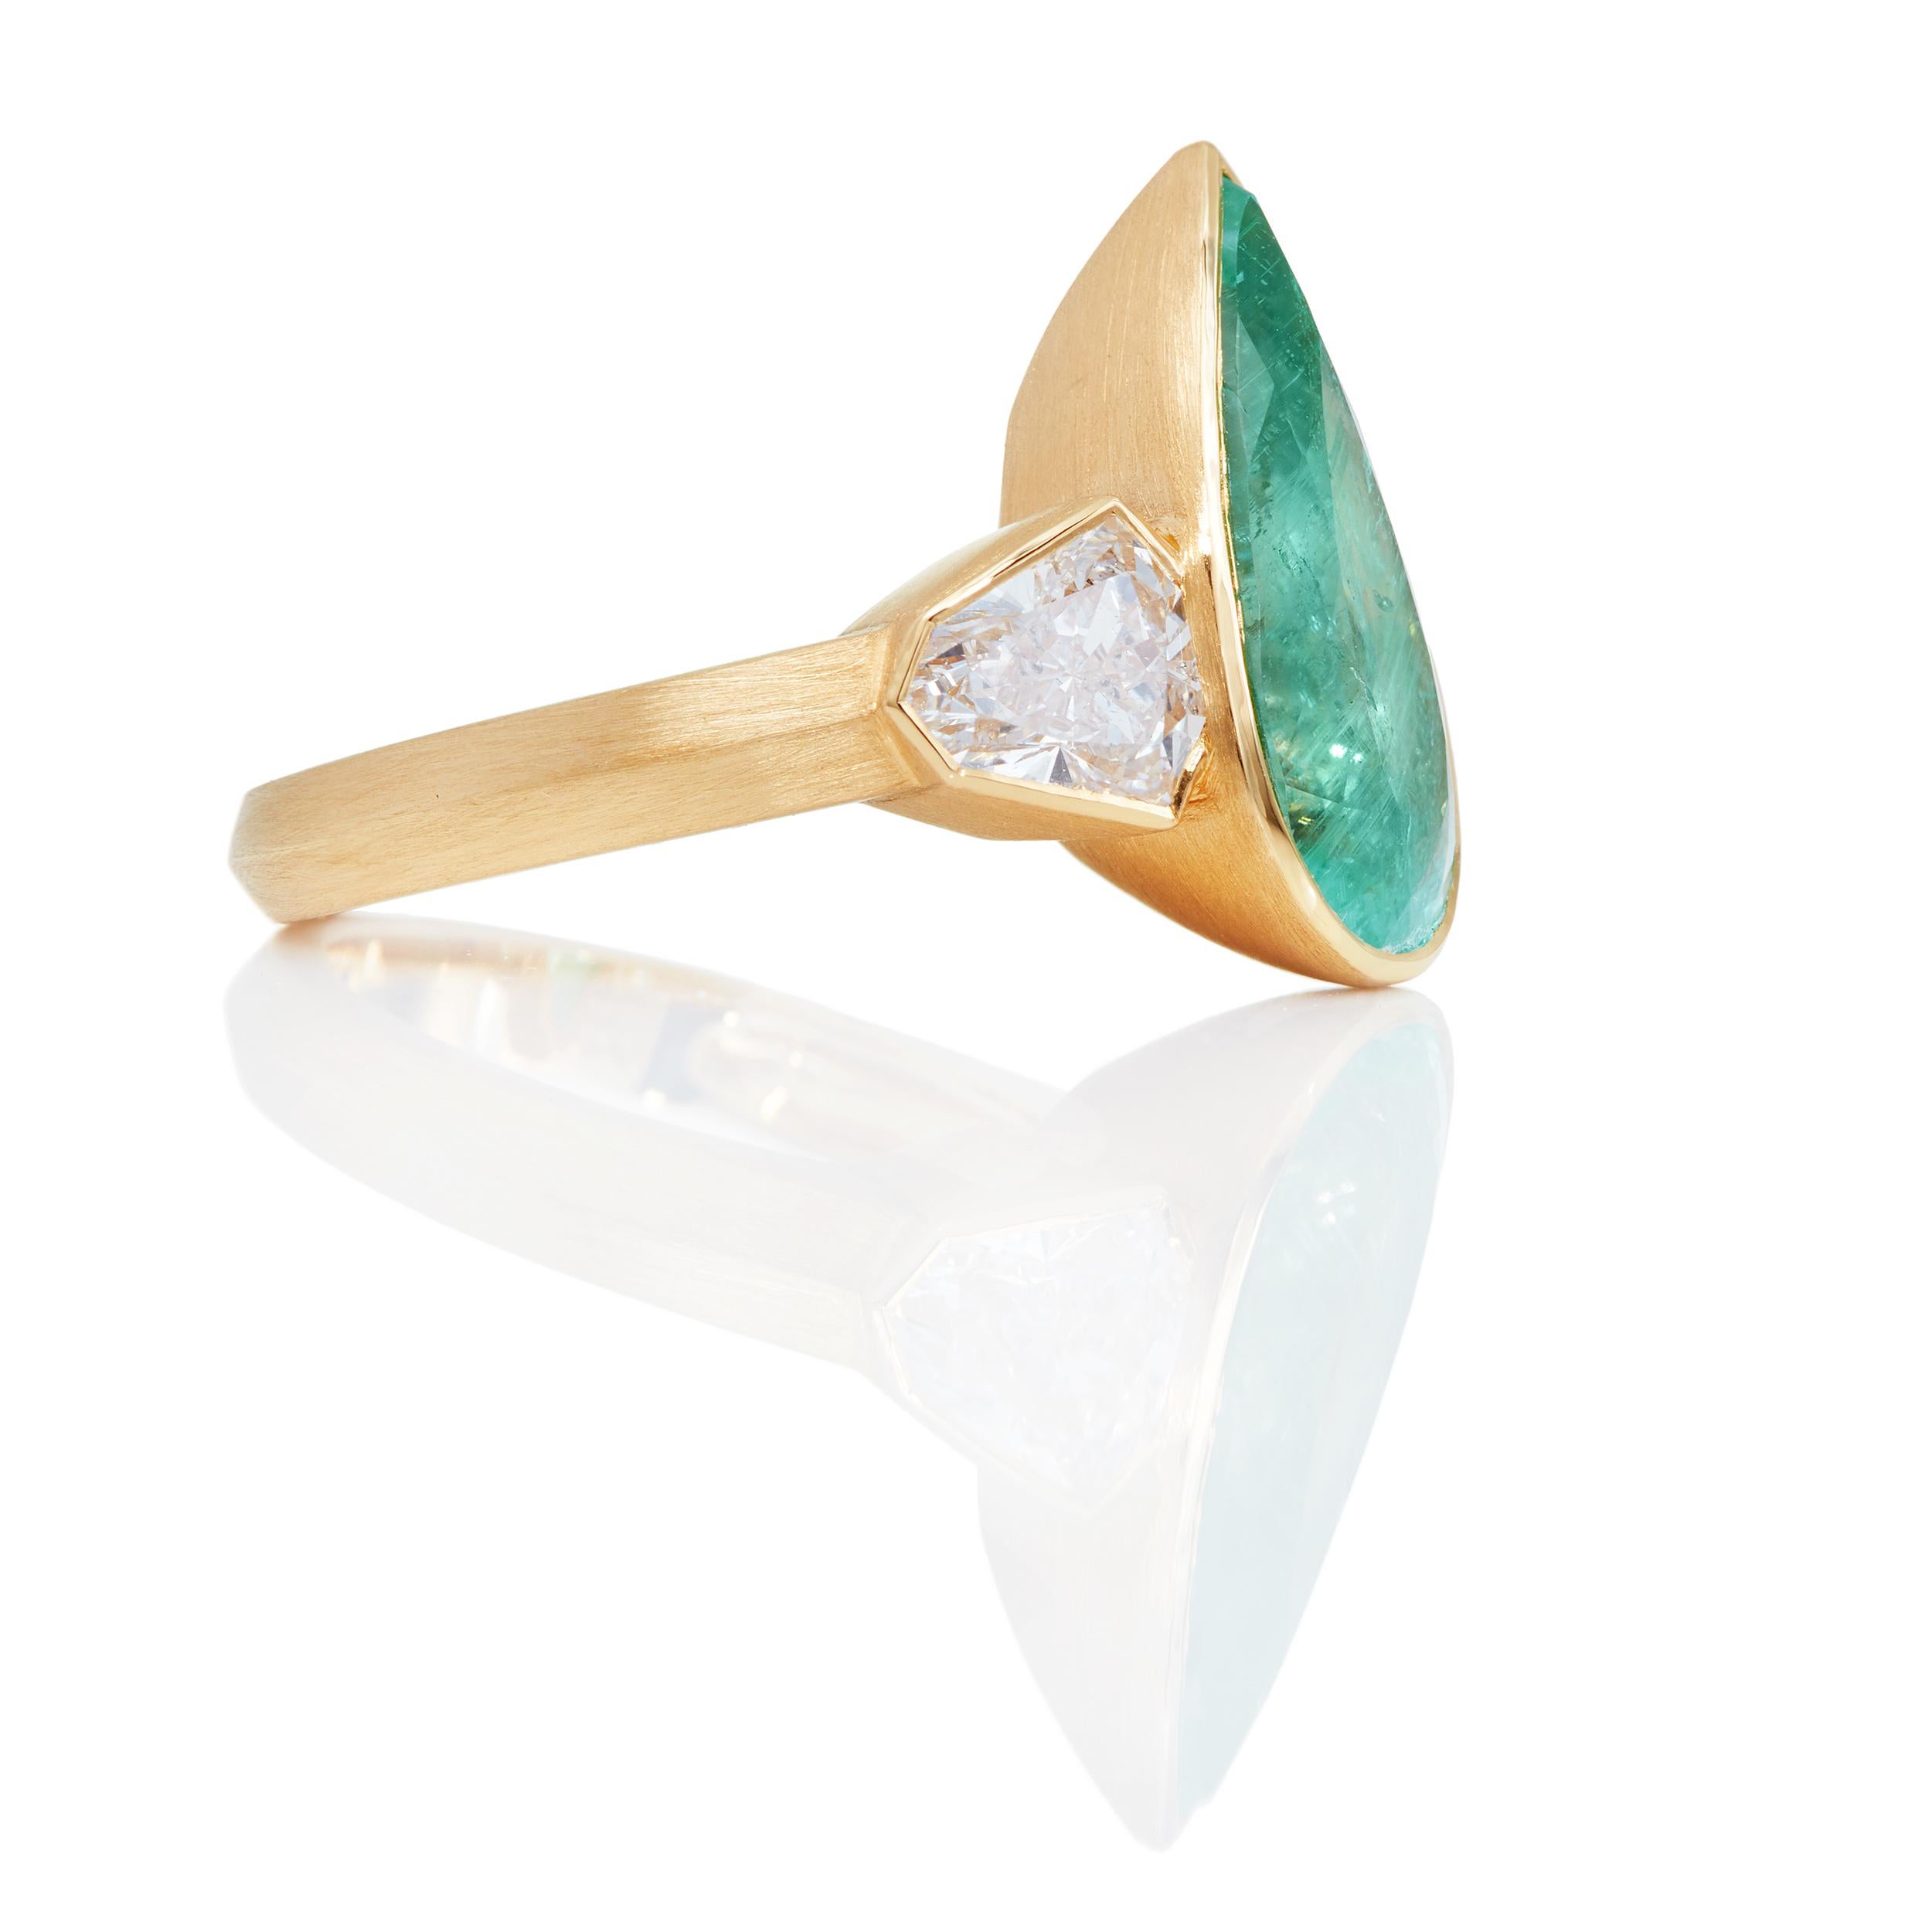 Gorgeous ring in 21 Karat yellow gold brushed finished. 

5.78 Carat Paraiba-type Tourmaline - origin Mozambique 

Diamond Detail:

(2) Shield-shaped Diamonds weighing 1.27 Carats
D Color
SI1 Clarity

Ring size 5.0
*Sizable upon request